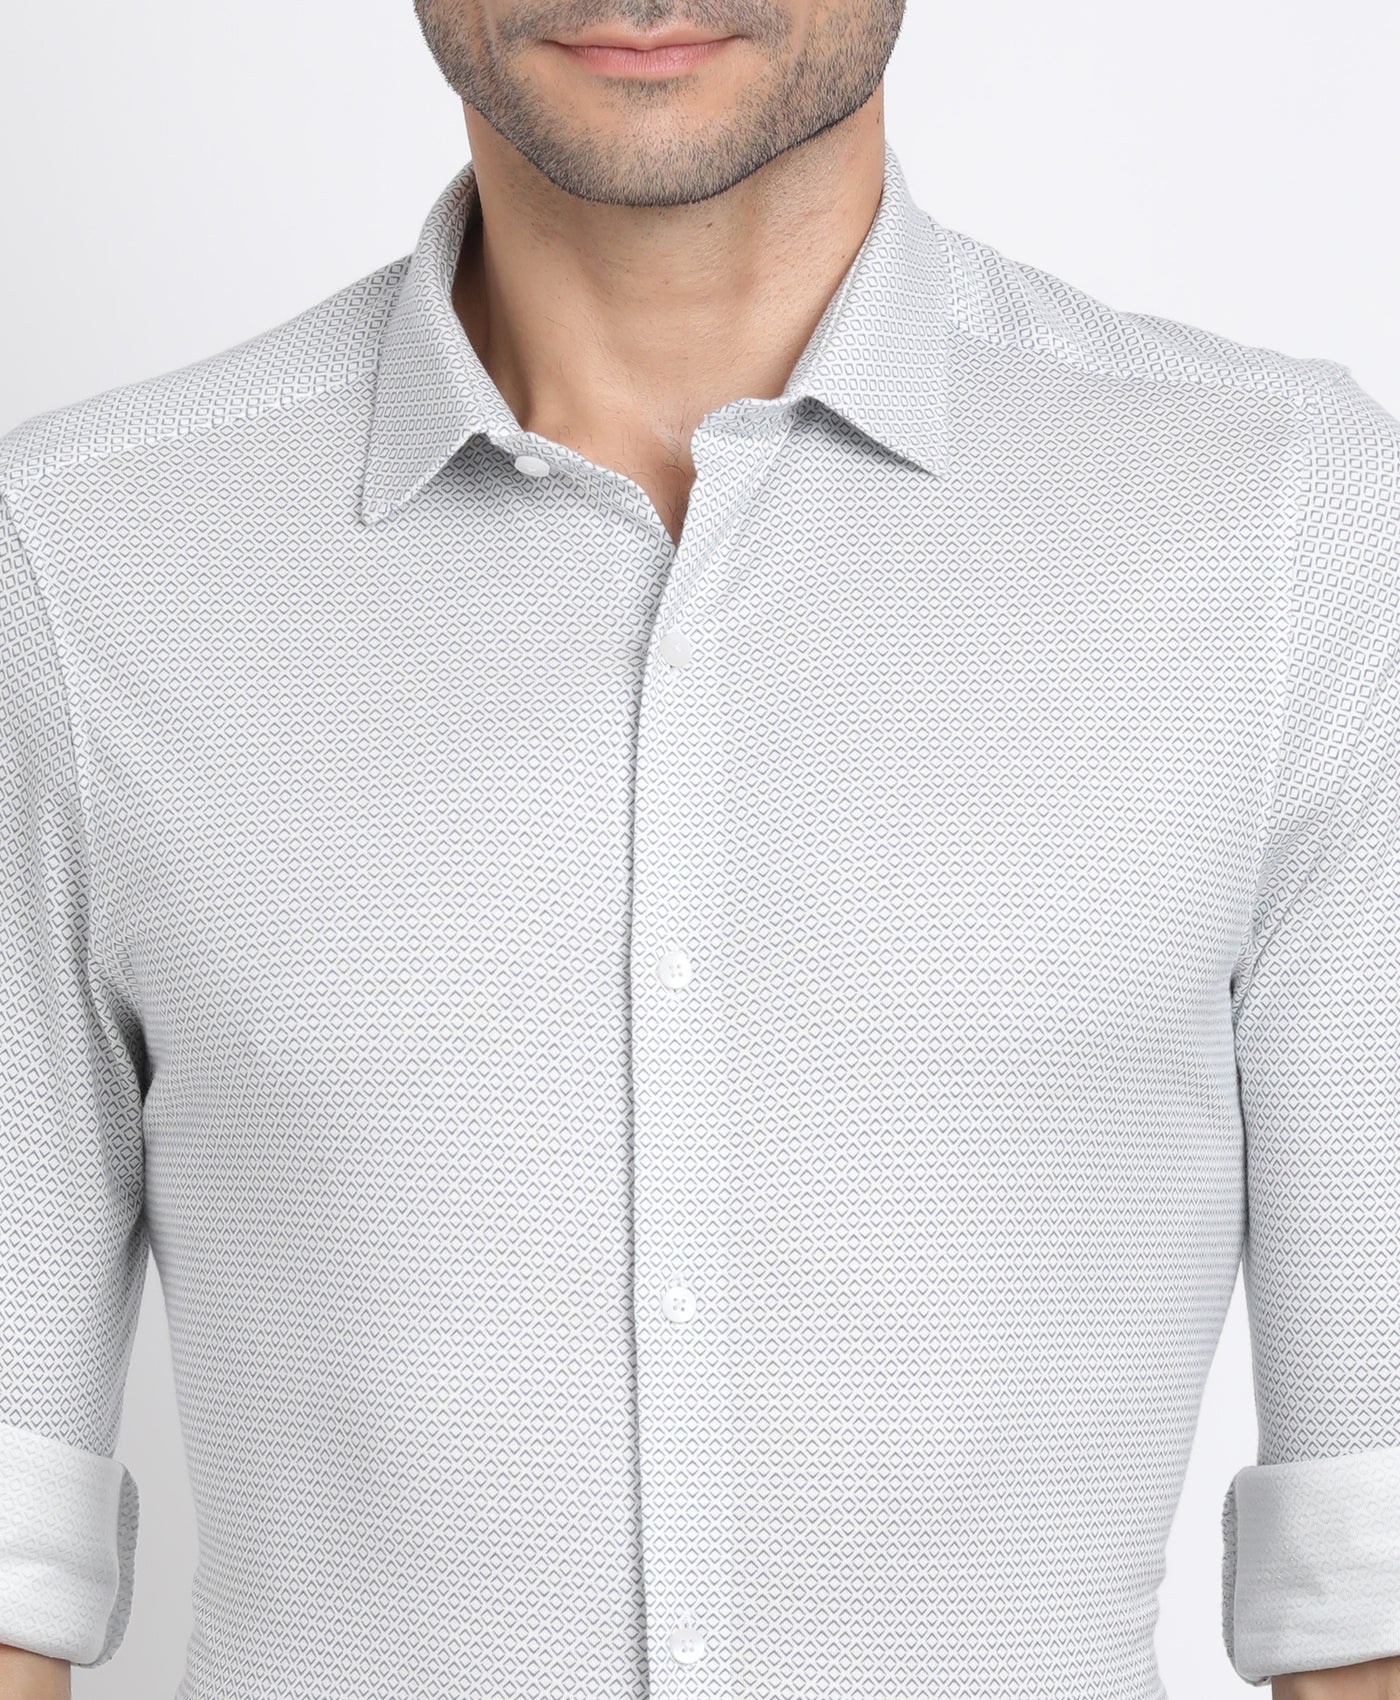 Knitted White Printed Slim Fit Full Sleeve Formal Shirt